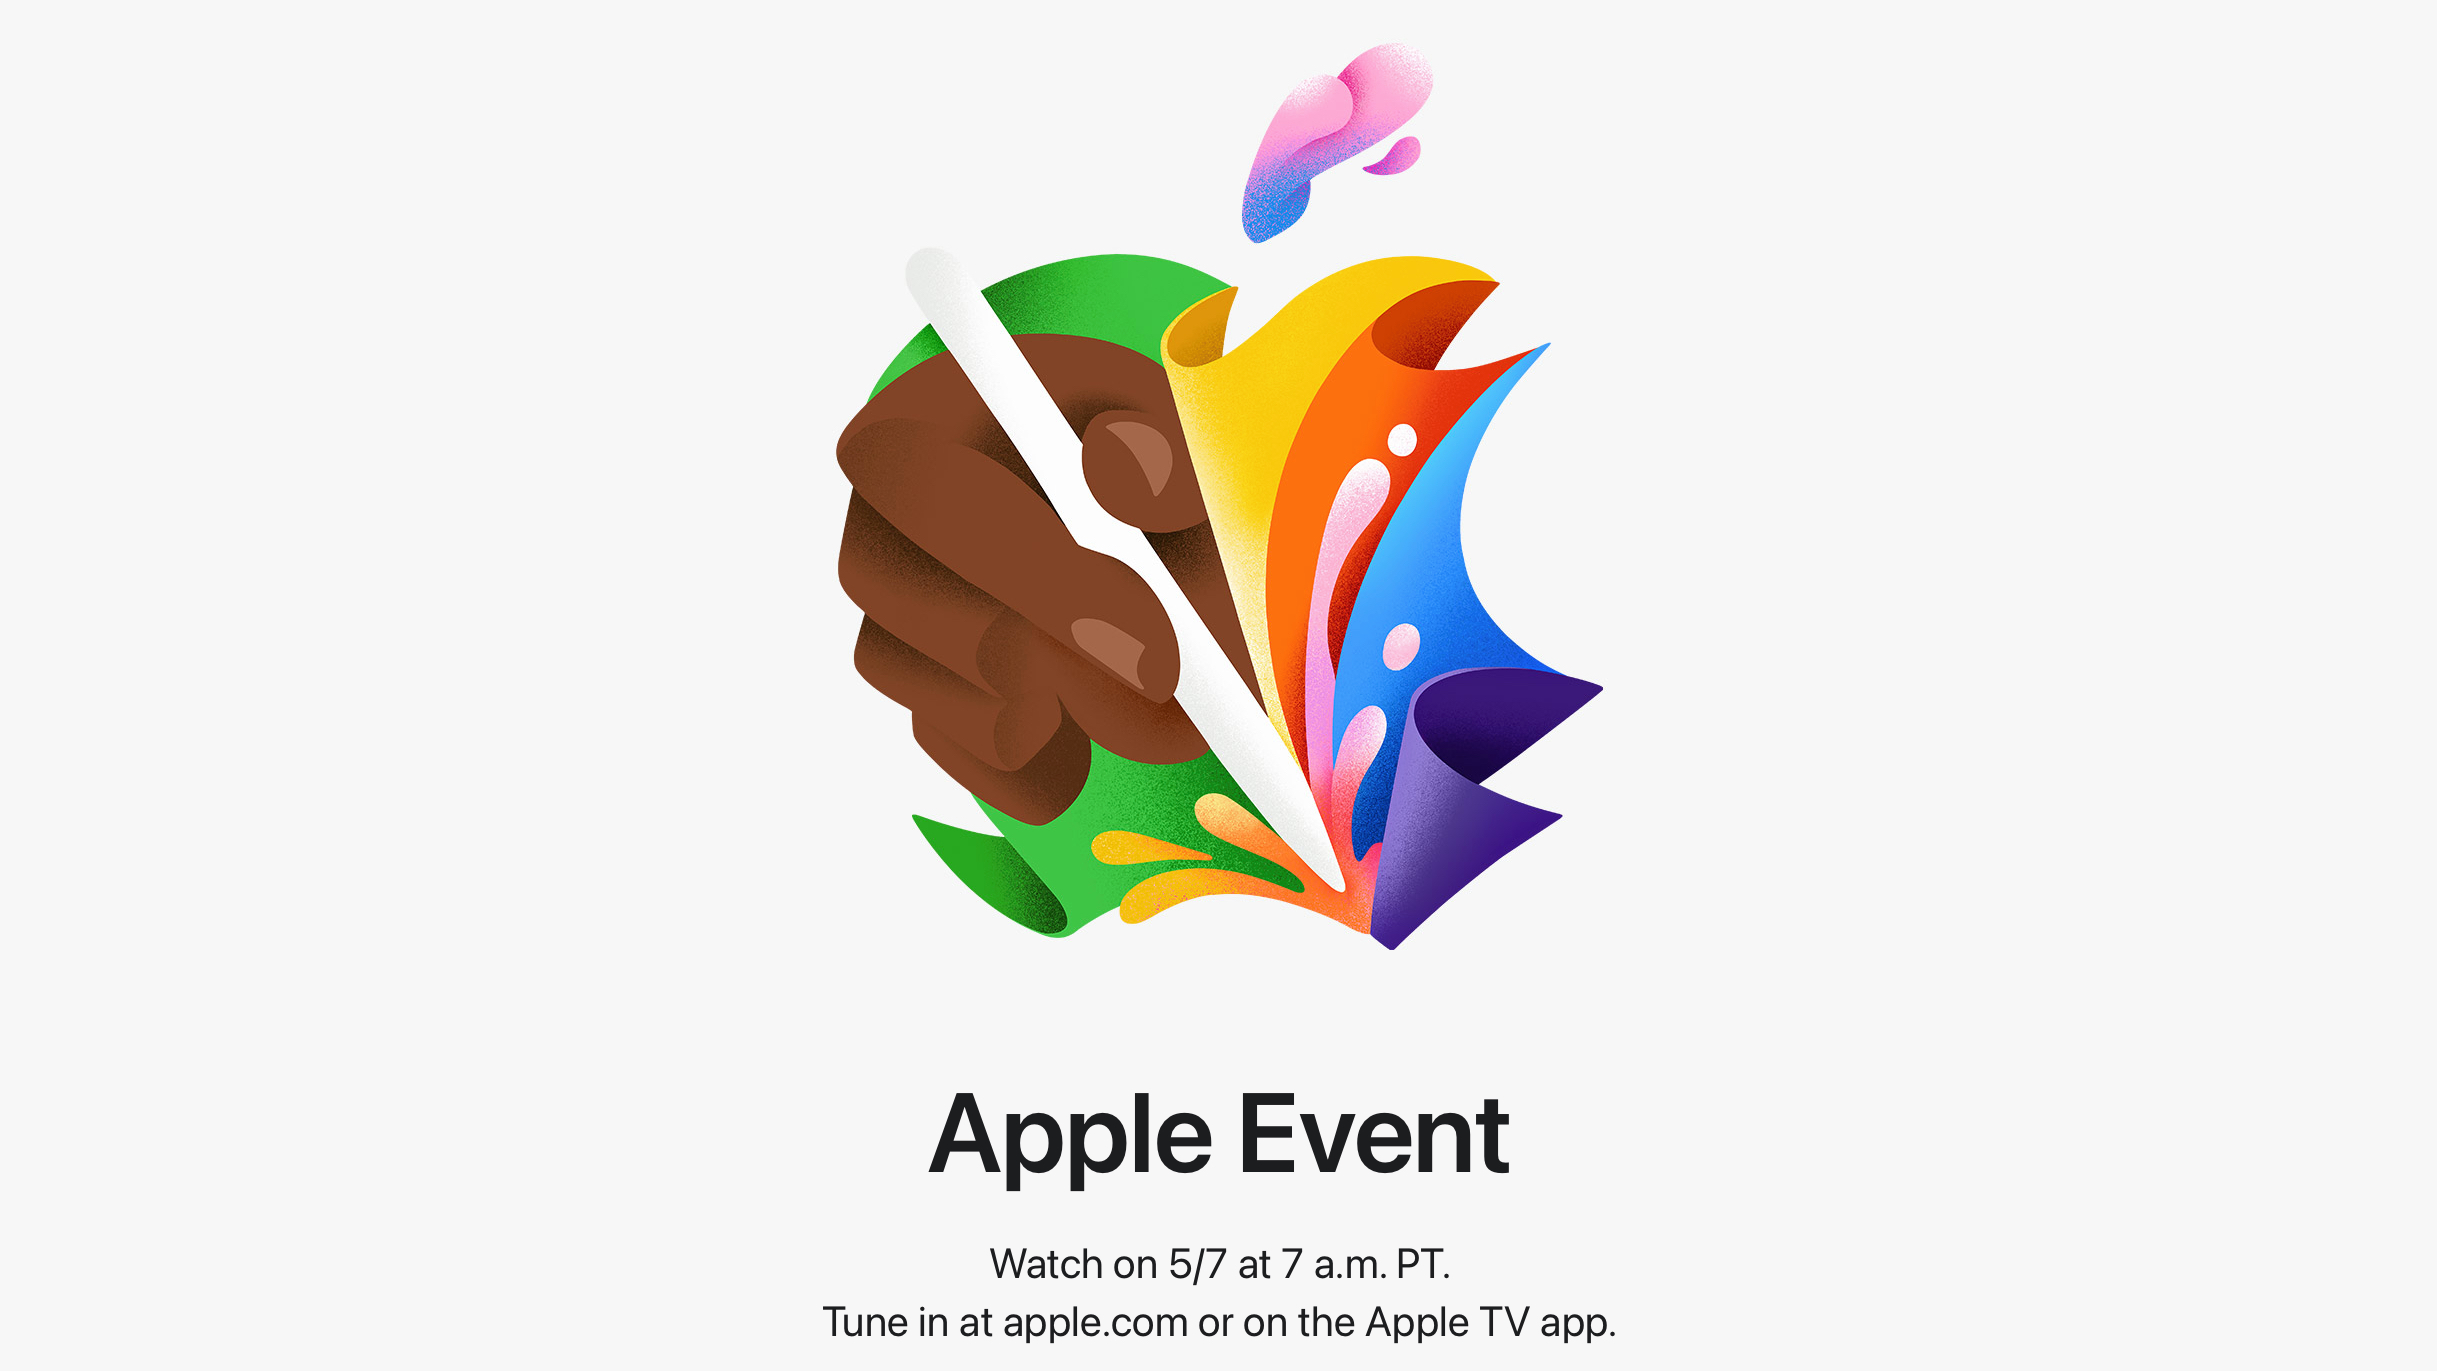 Apple event poster featuring a hand holding an Apple Pencil.